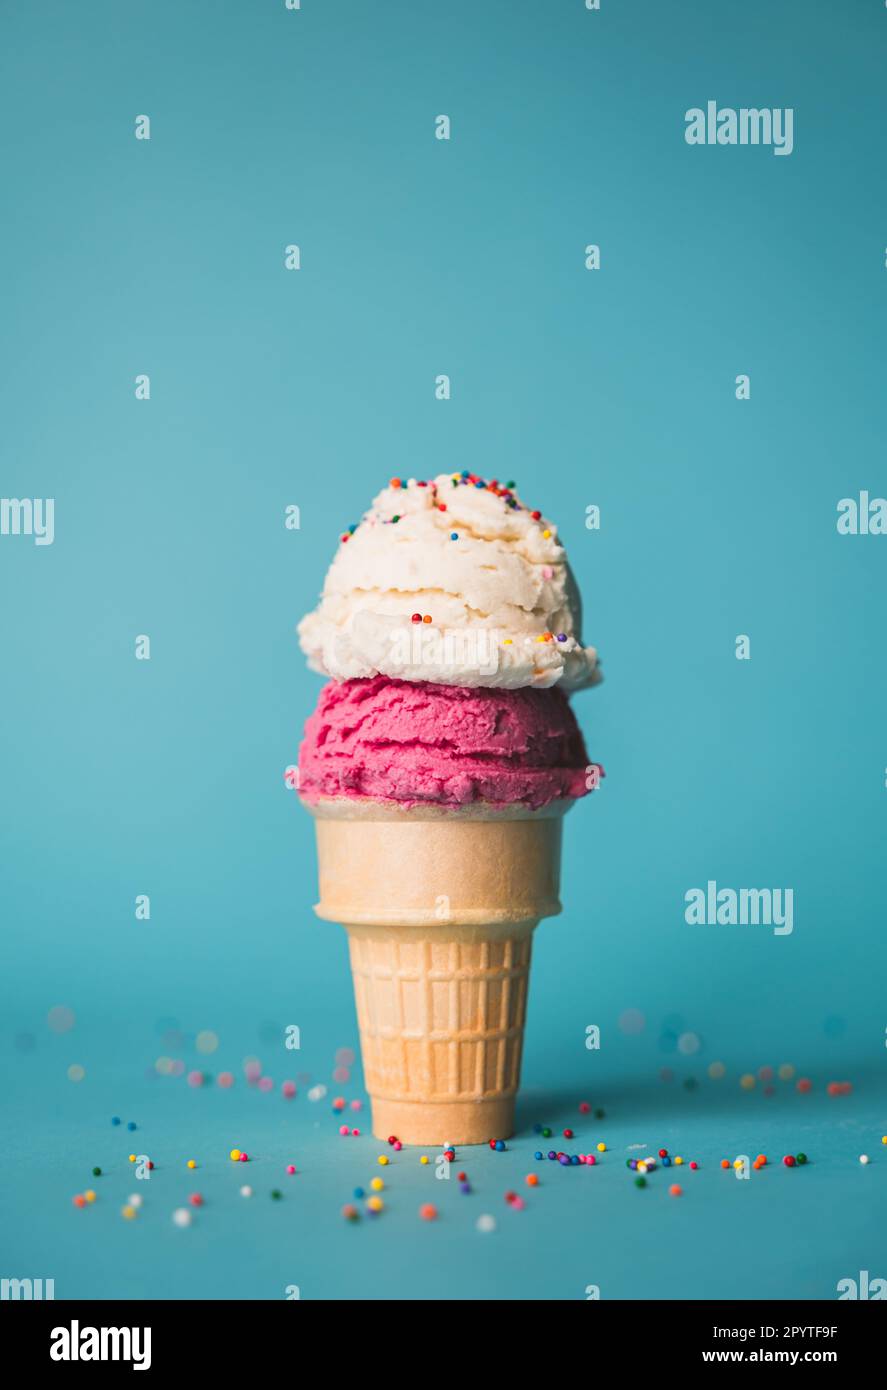 Ice cream cone with two scoops and sprinkles on blue background. Stock Photo